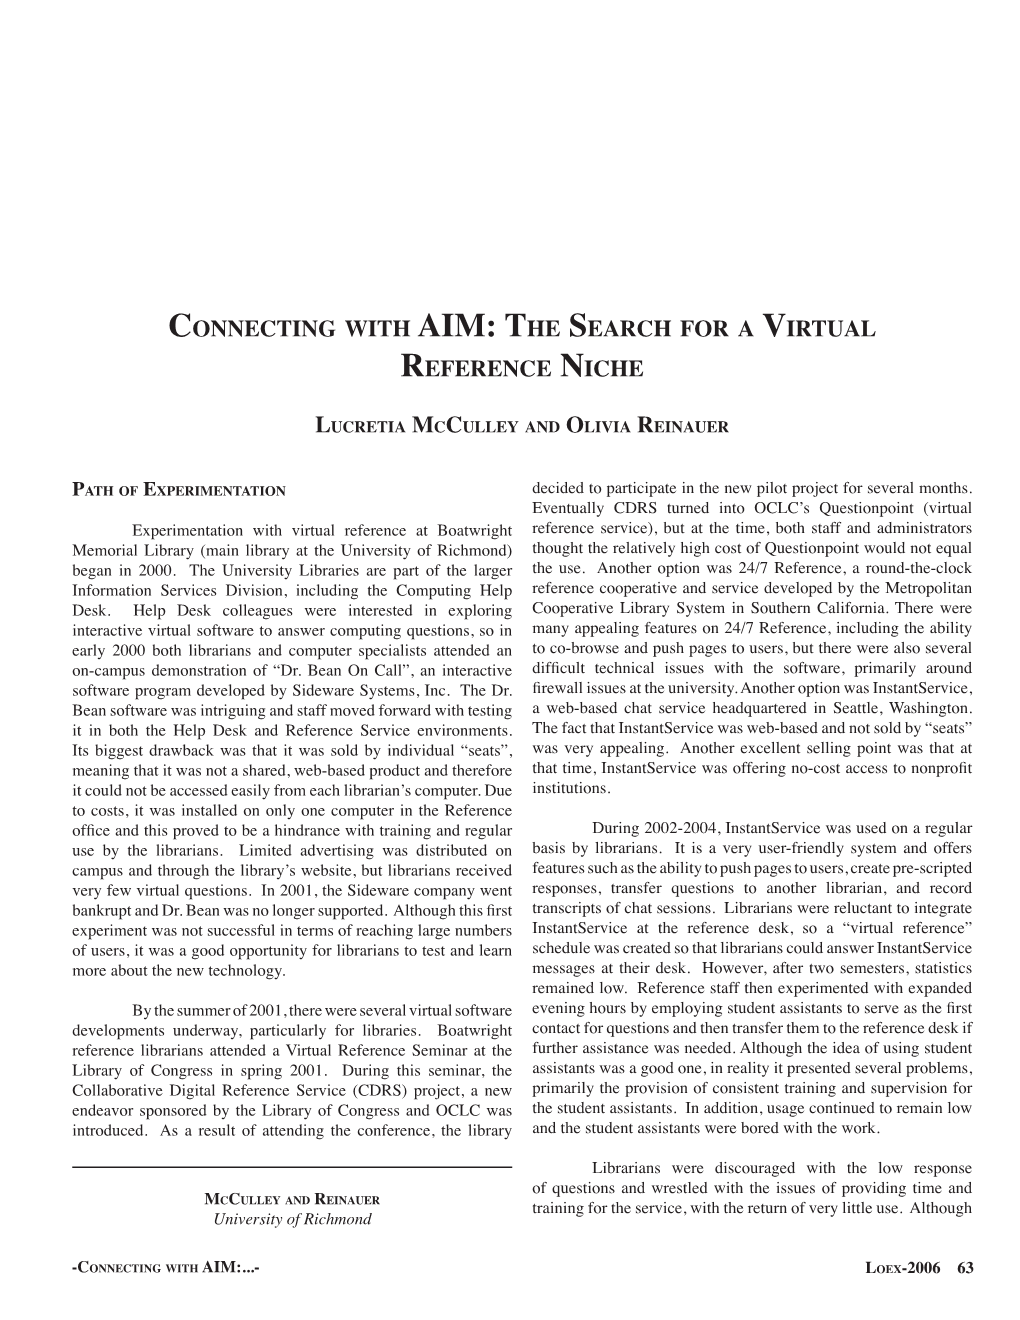 Connecting with AIM: the Search for a Virtual Reference Niche